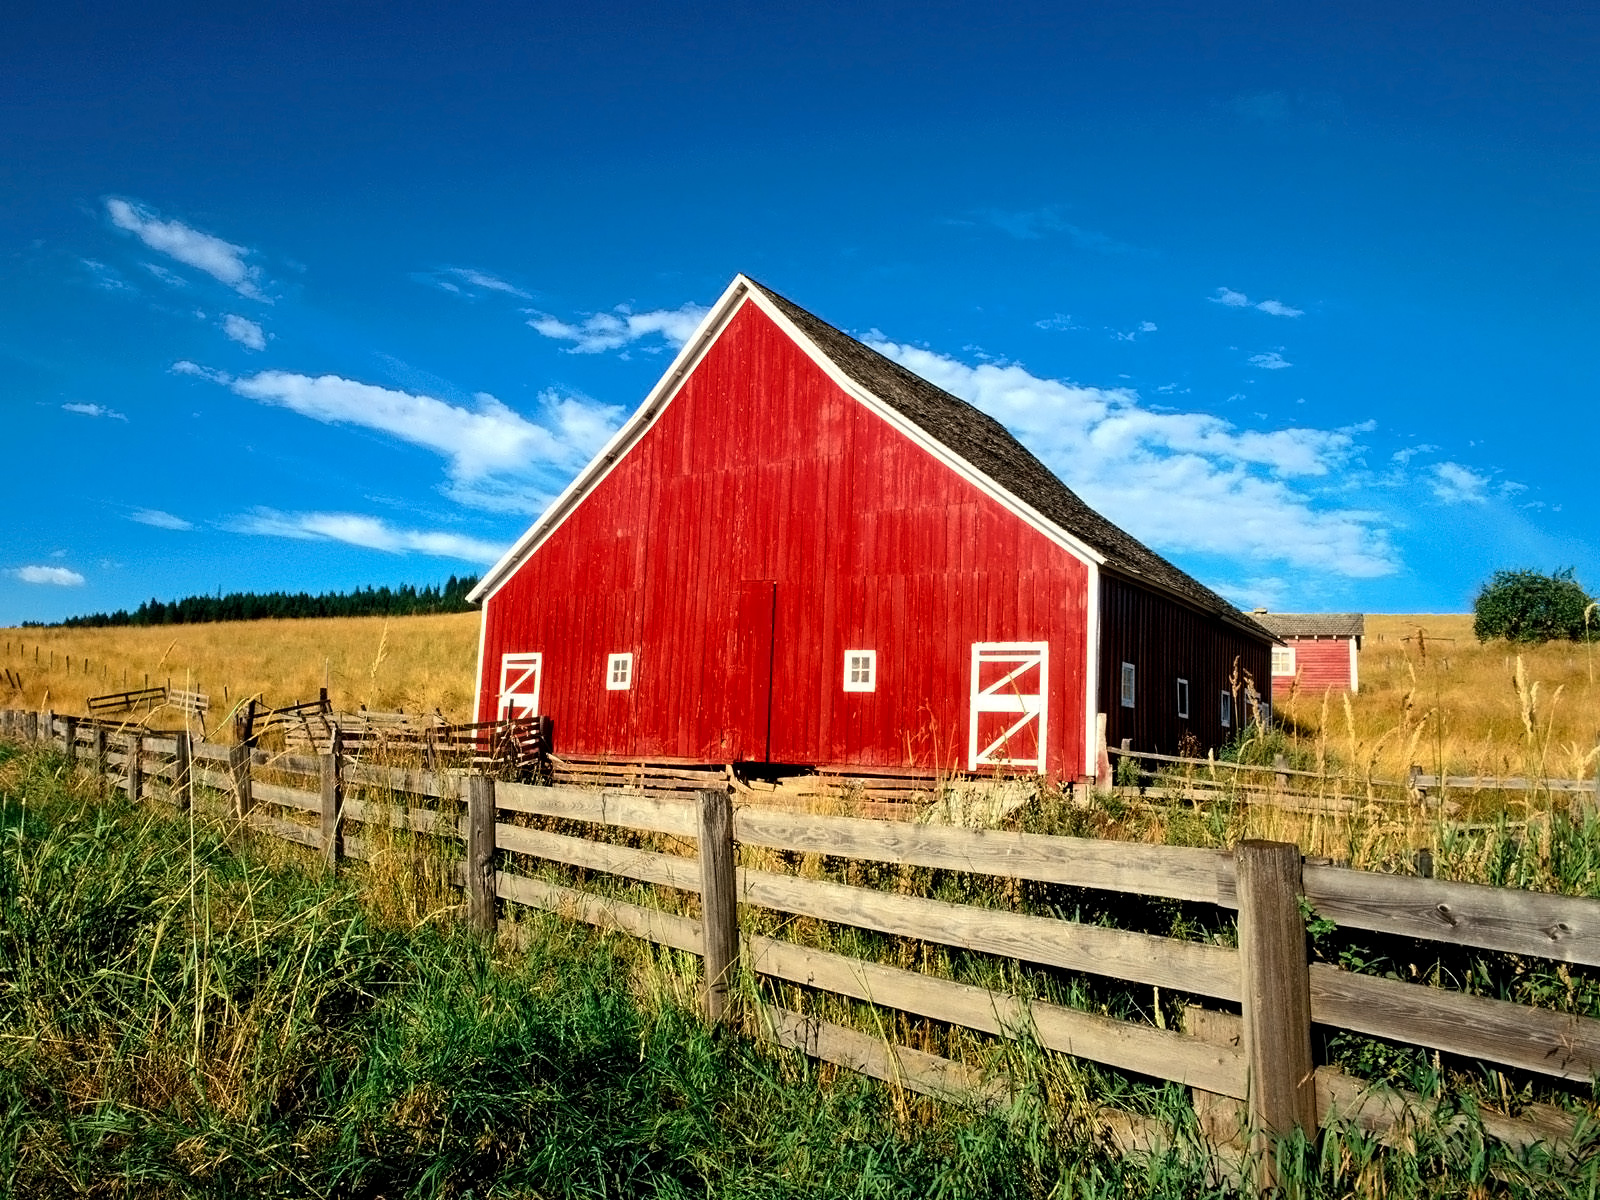 Red Barn Quotes. QuotesGram